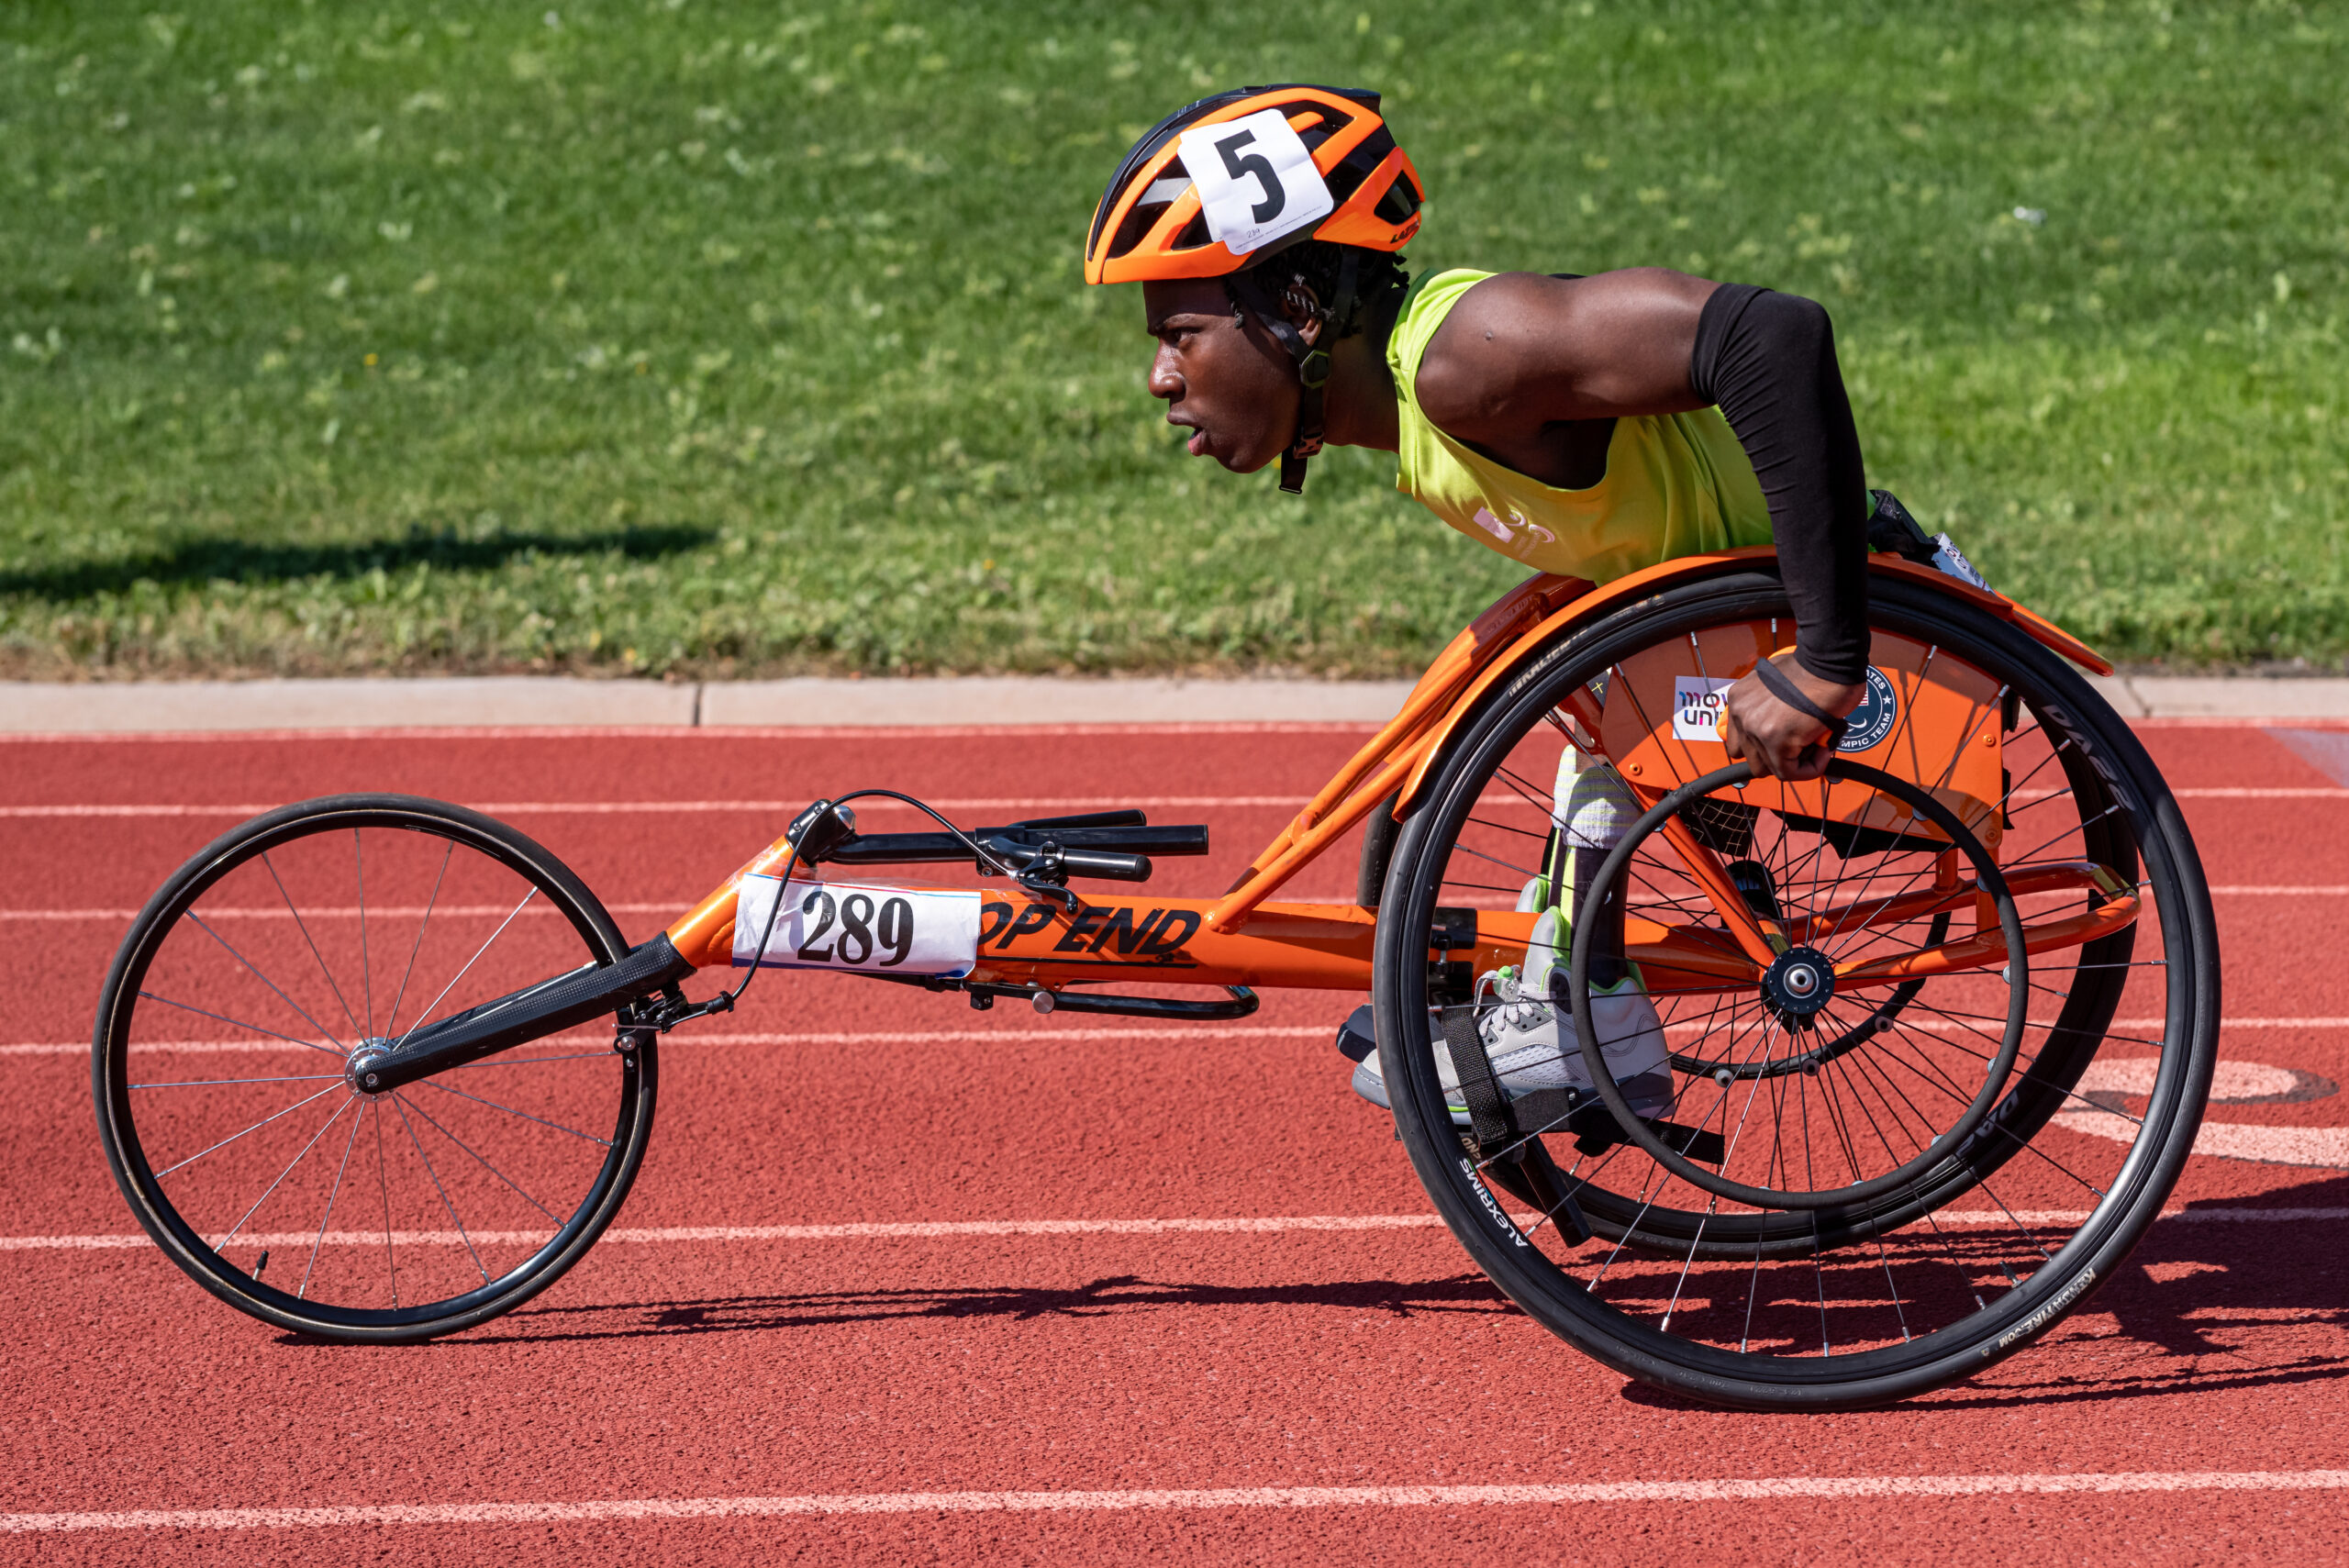 wheelchair racer competing on a track